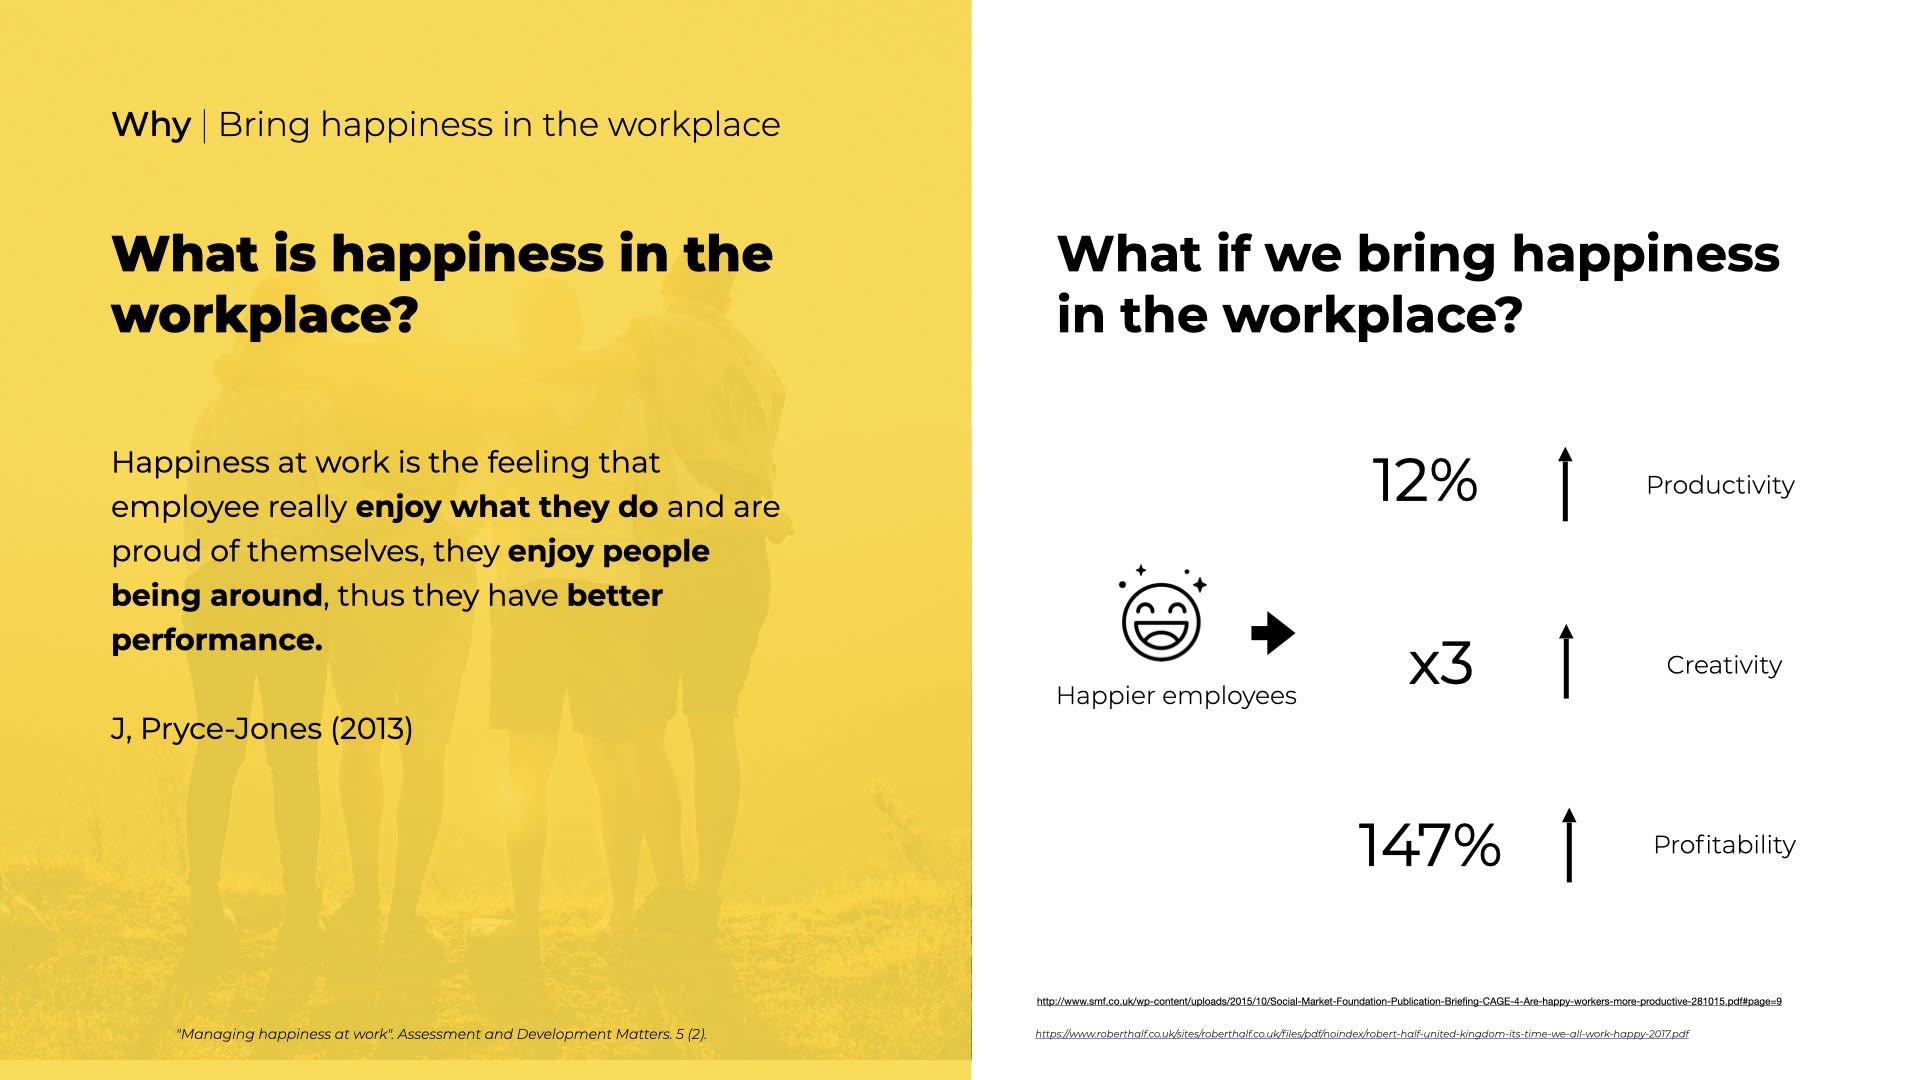 What if we bring happiness in the workplace?